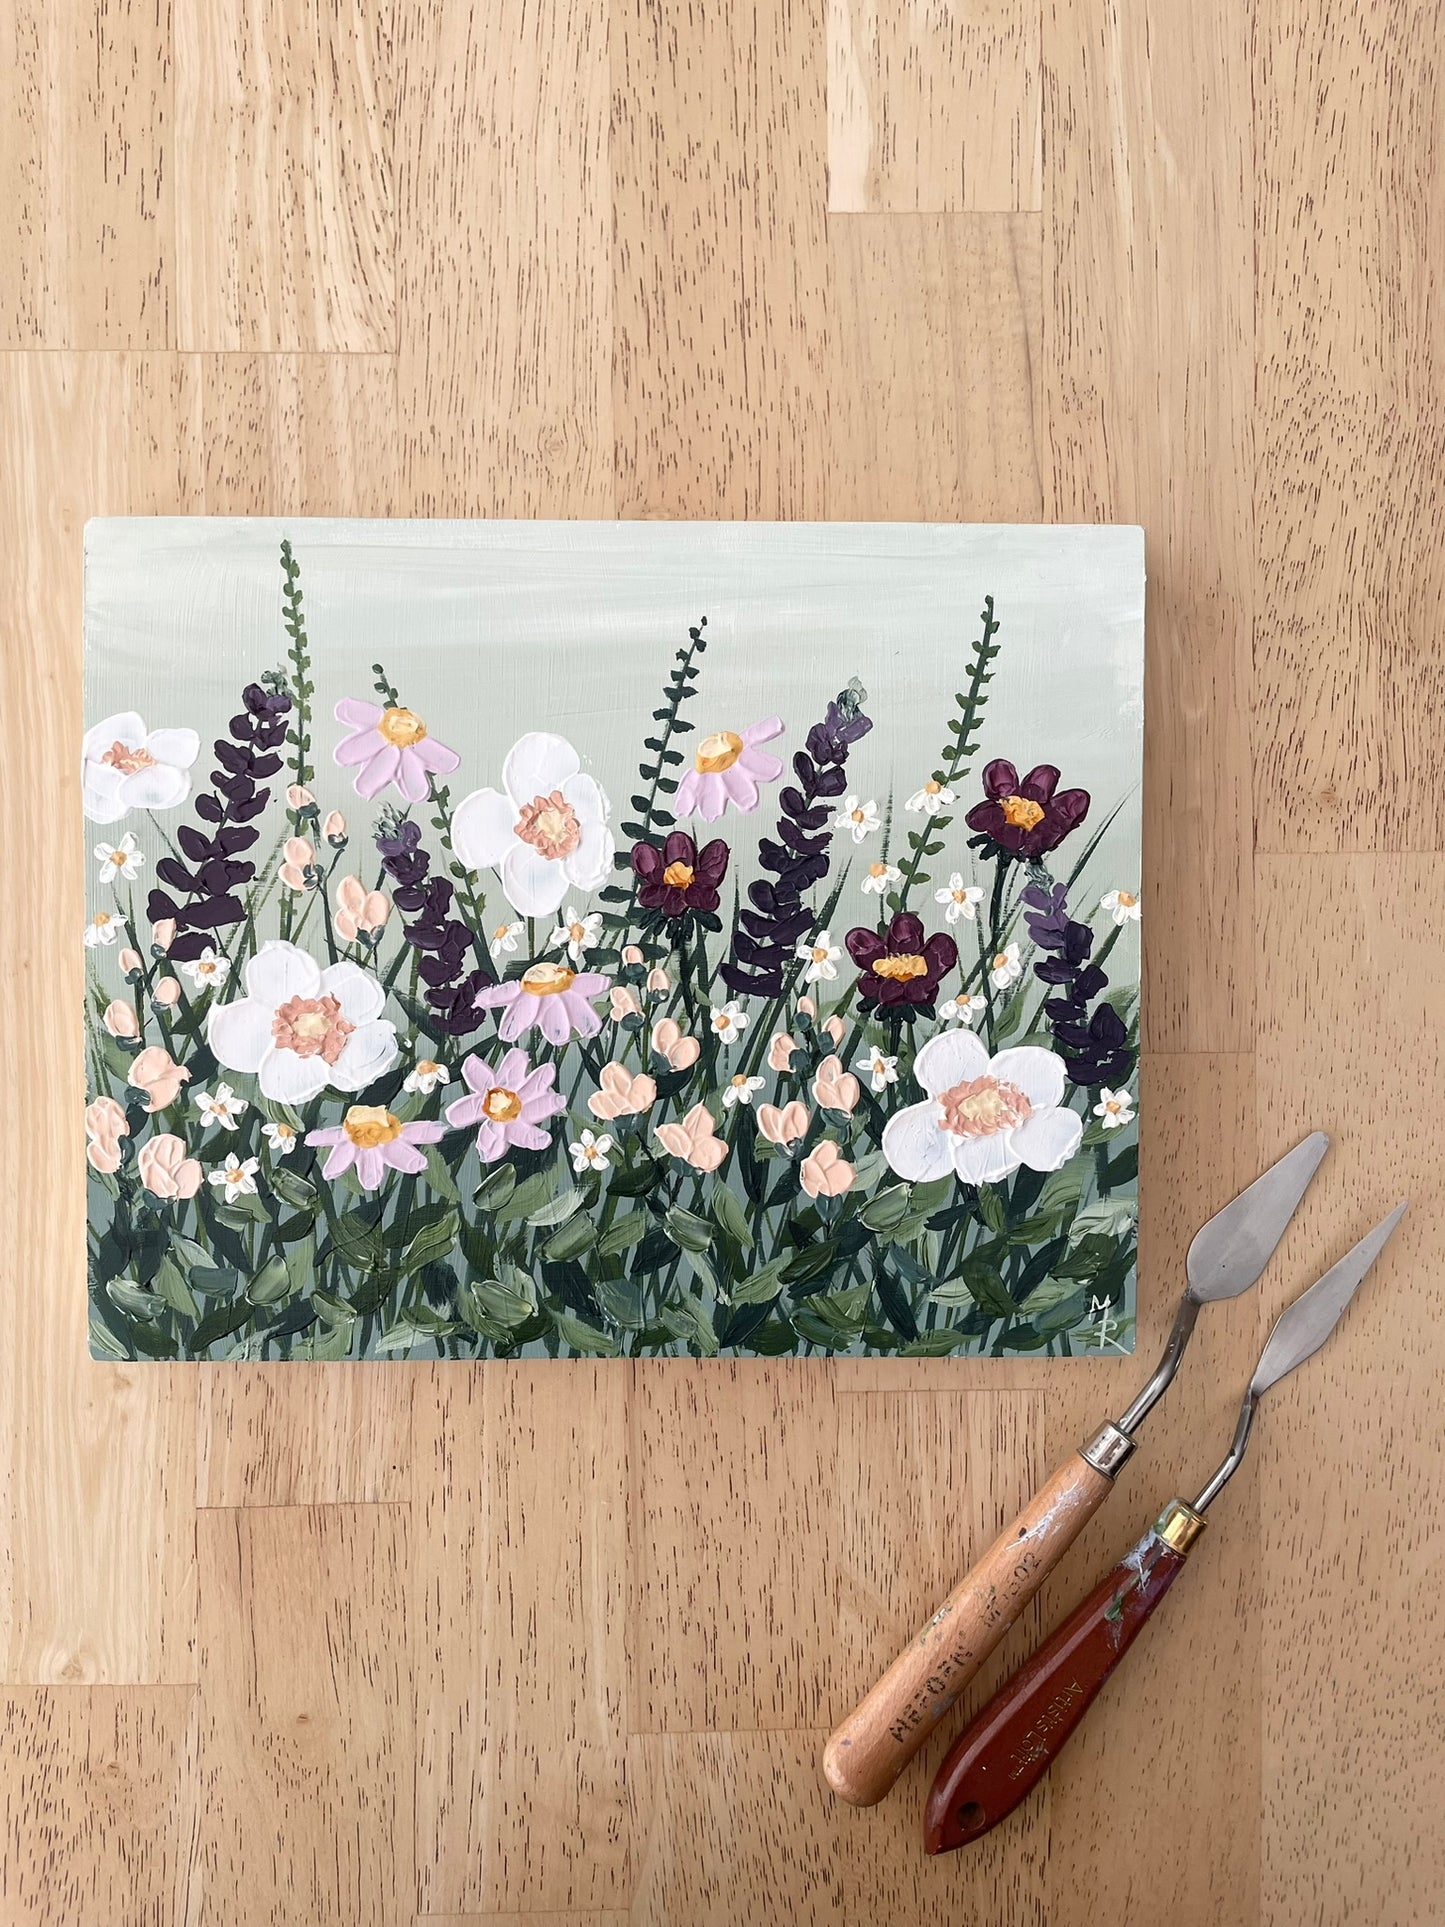 "Wild Blooms" acrylic painting